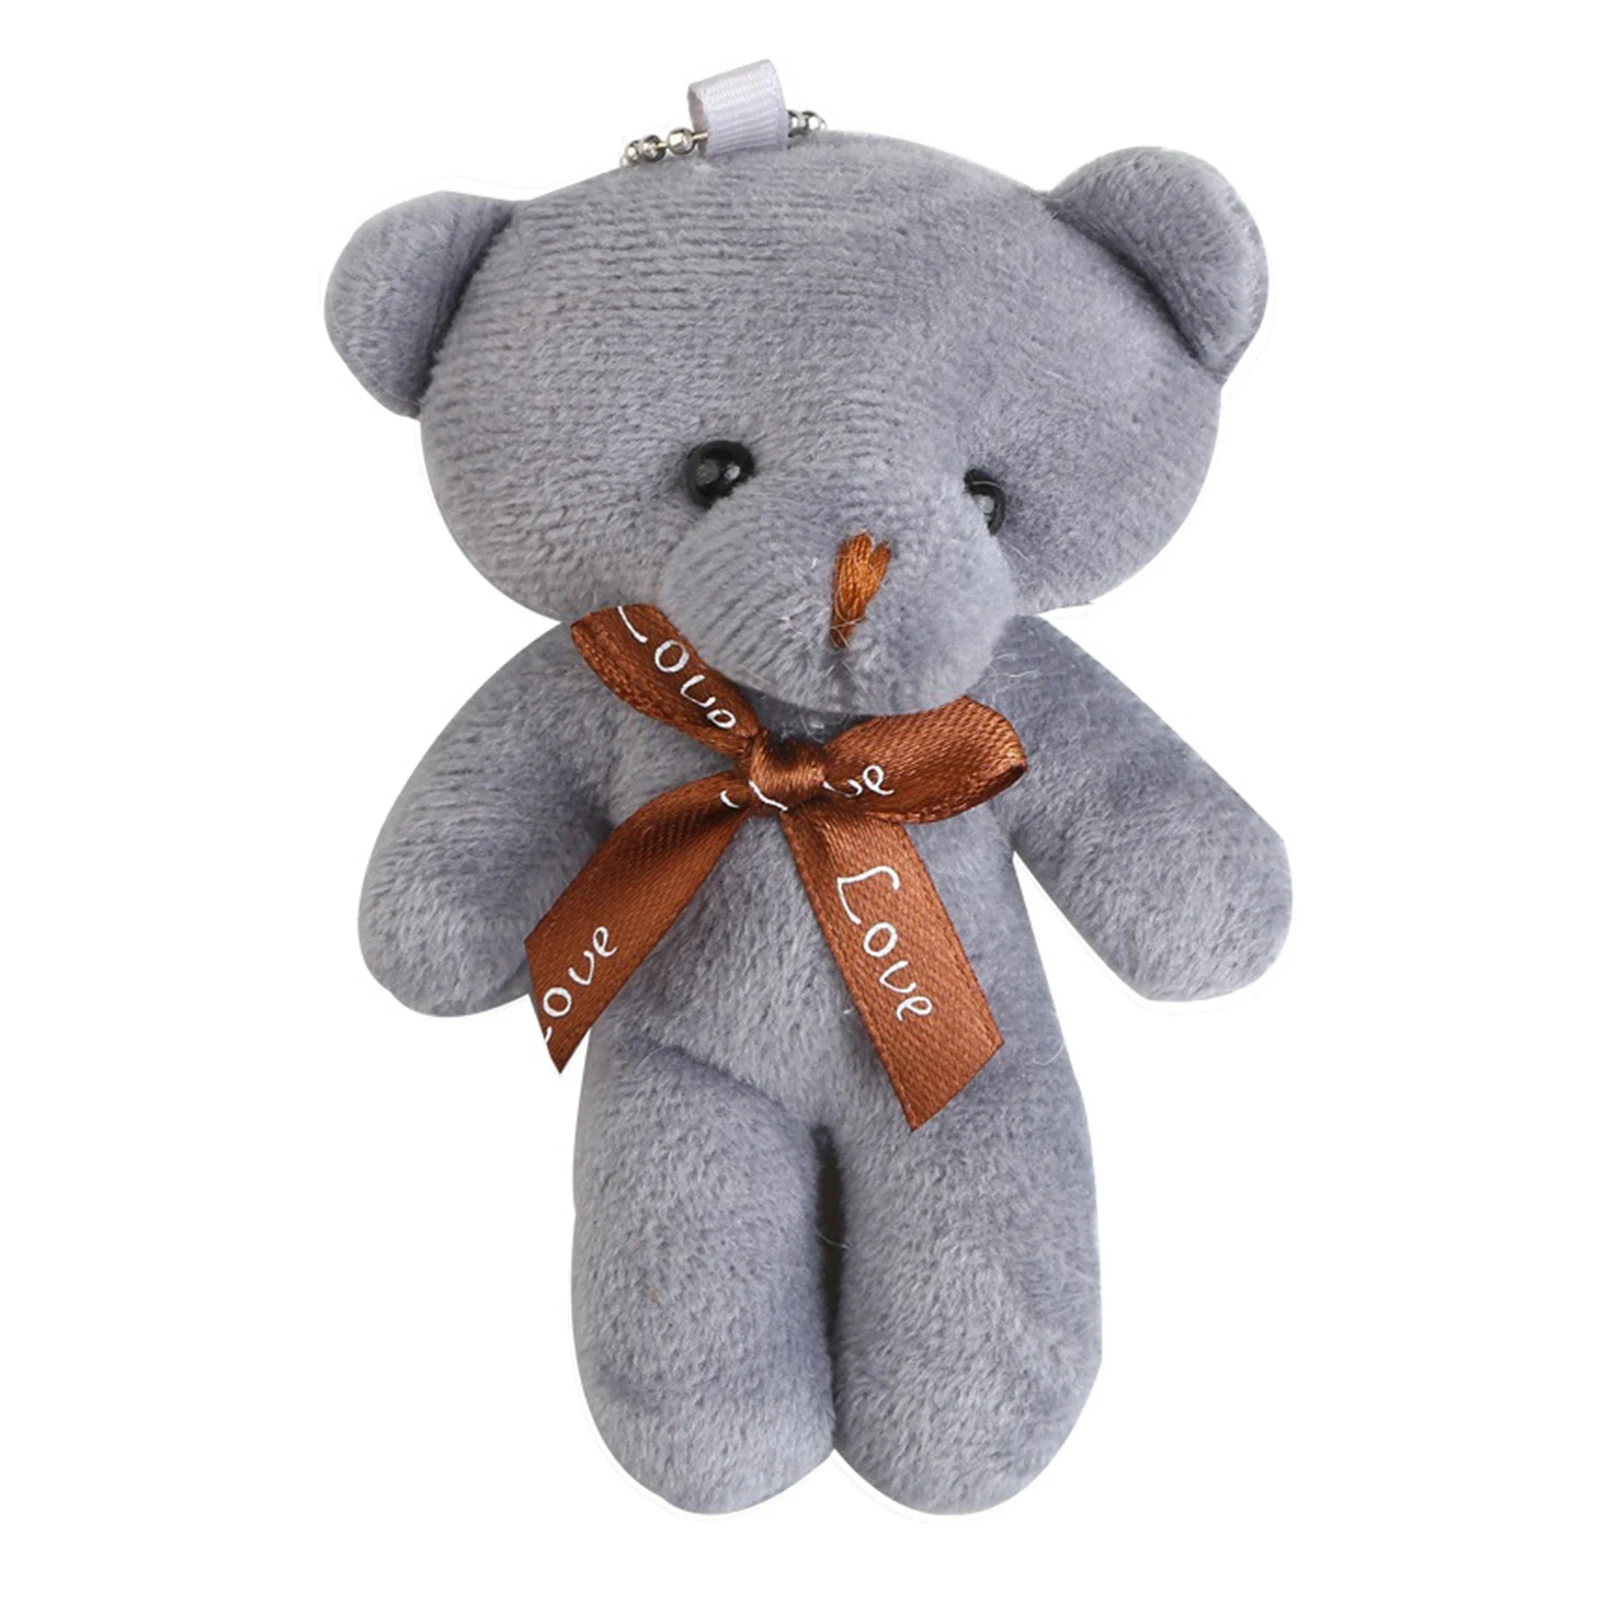 

12cm A Tie Plush Toy Teddy Bear Doll Pendant Keychain Pp Cotton Soft Stuffed Bears Toy Doll Toy Gifts 1Pc